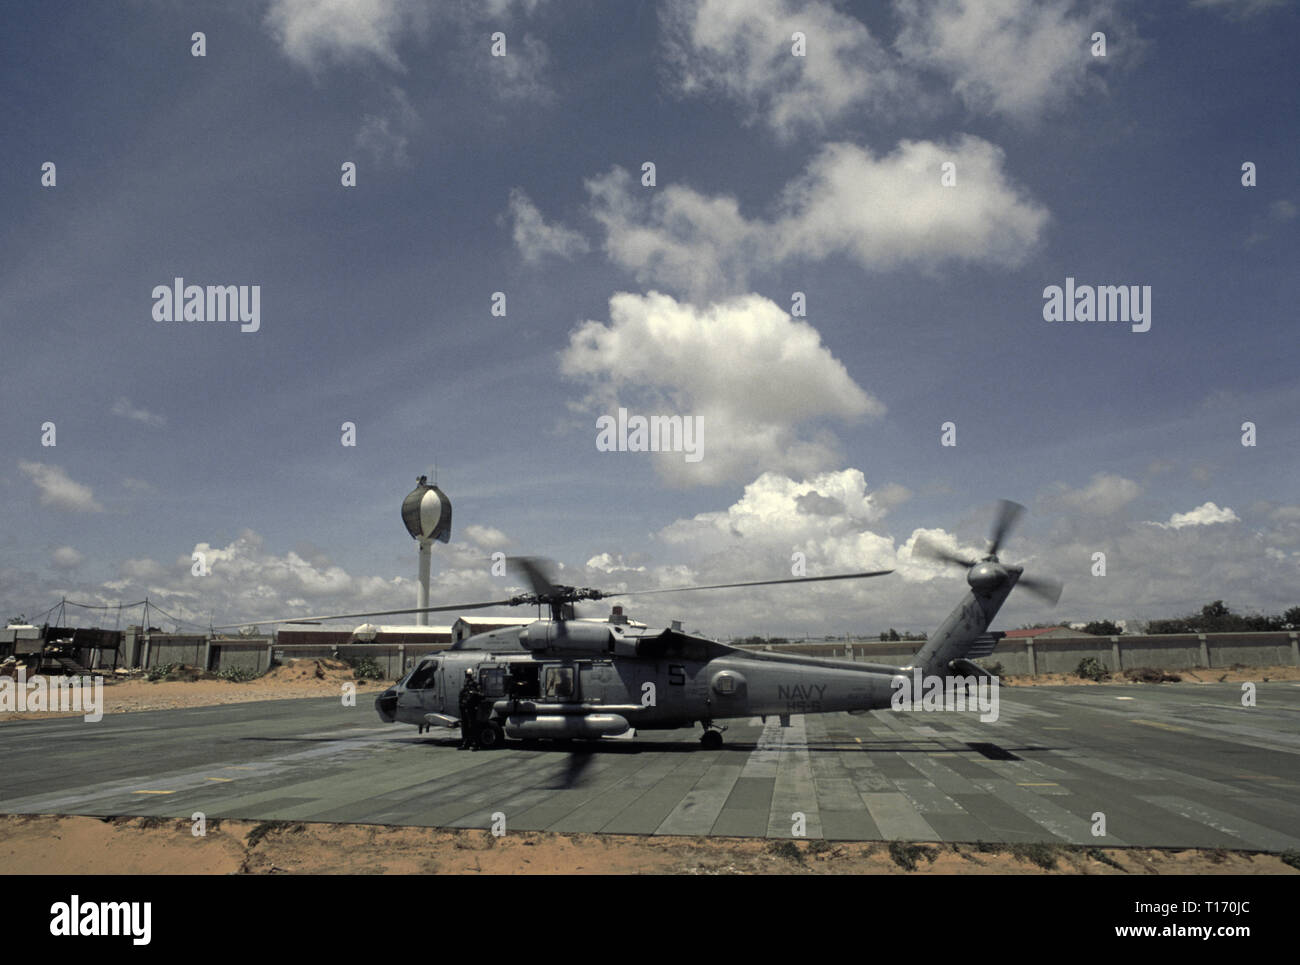 29th October 1993 A U.S. Navy Sikorsky SH-60 Seahawk helicopter from the USS Abraham Lincoln, ready for take-off from UNOSOM HQ in Mogadishu, Somalia. Stock Photo